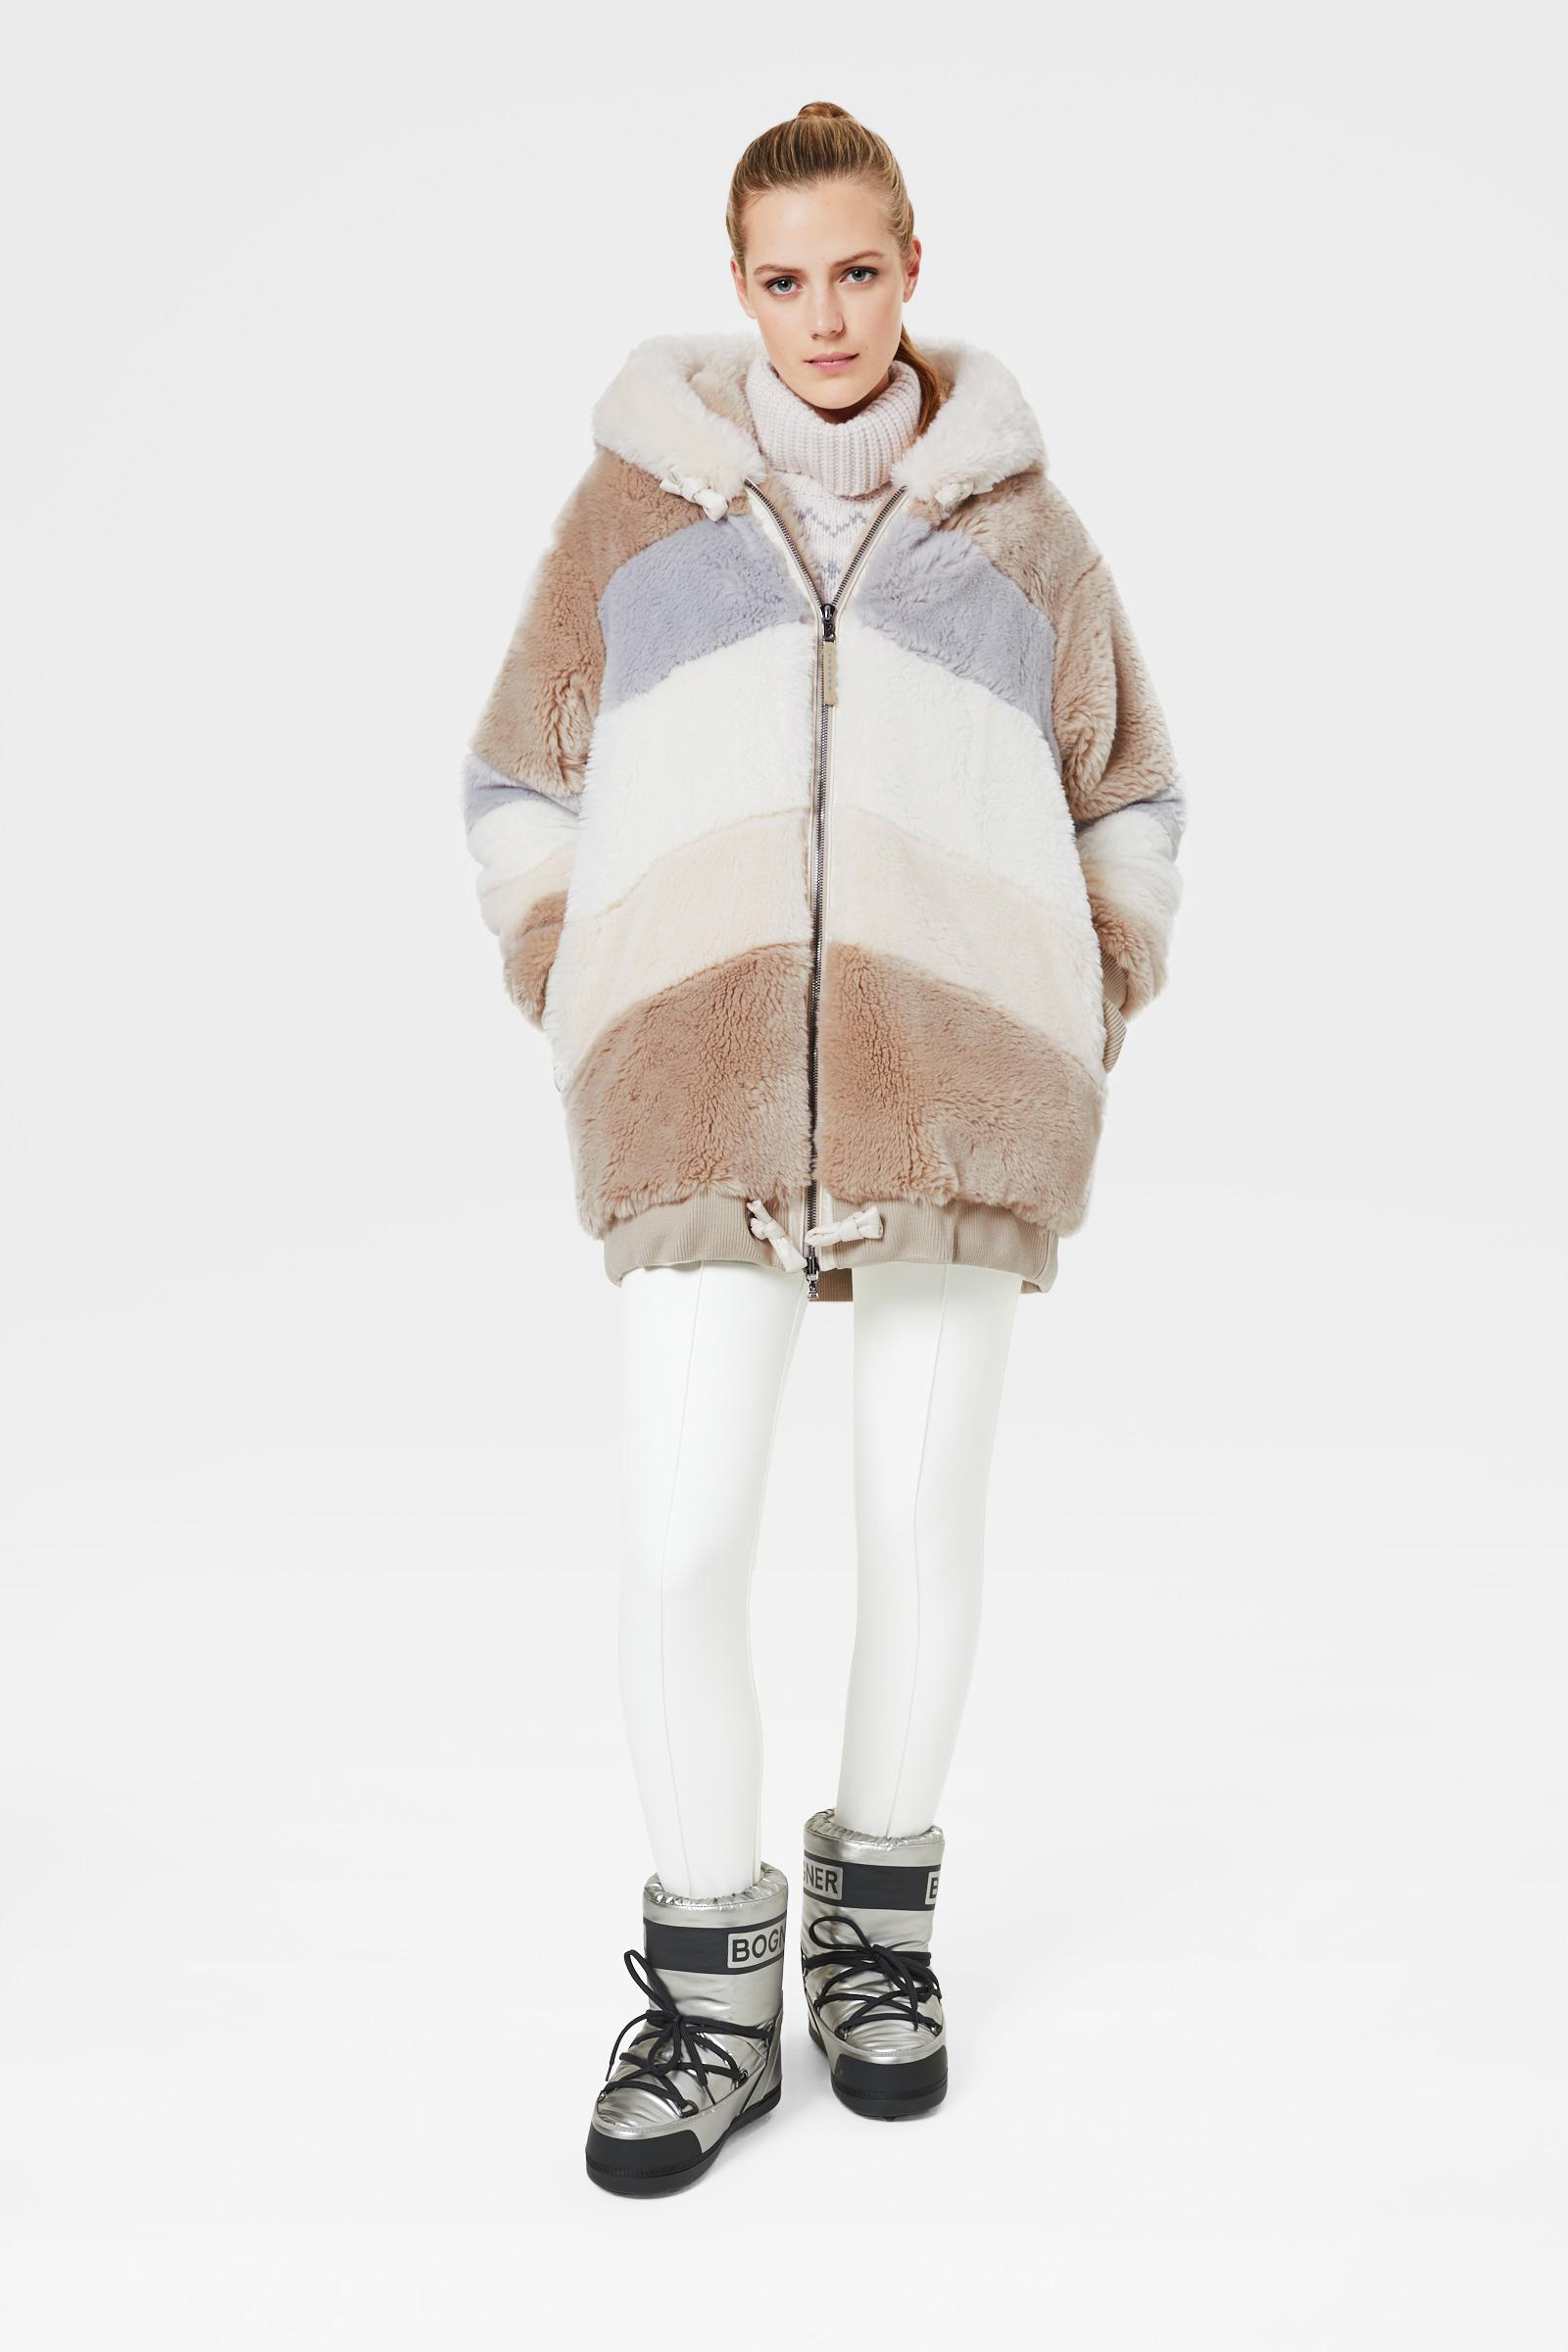 Bogner Indra Faux Fur Jacket in Beige/Brown/White (Natural) | Lyst Canada